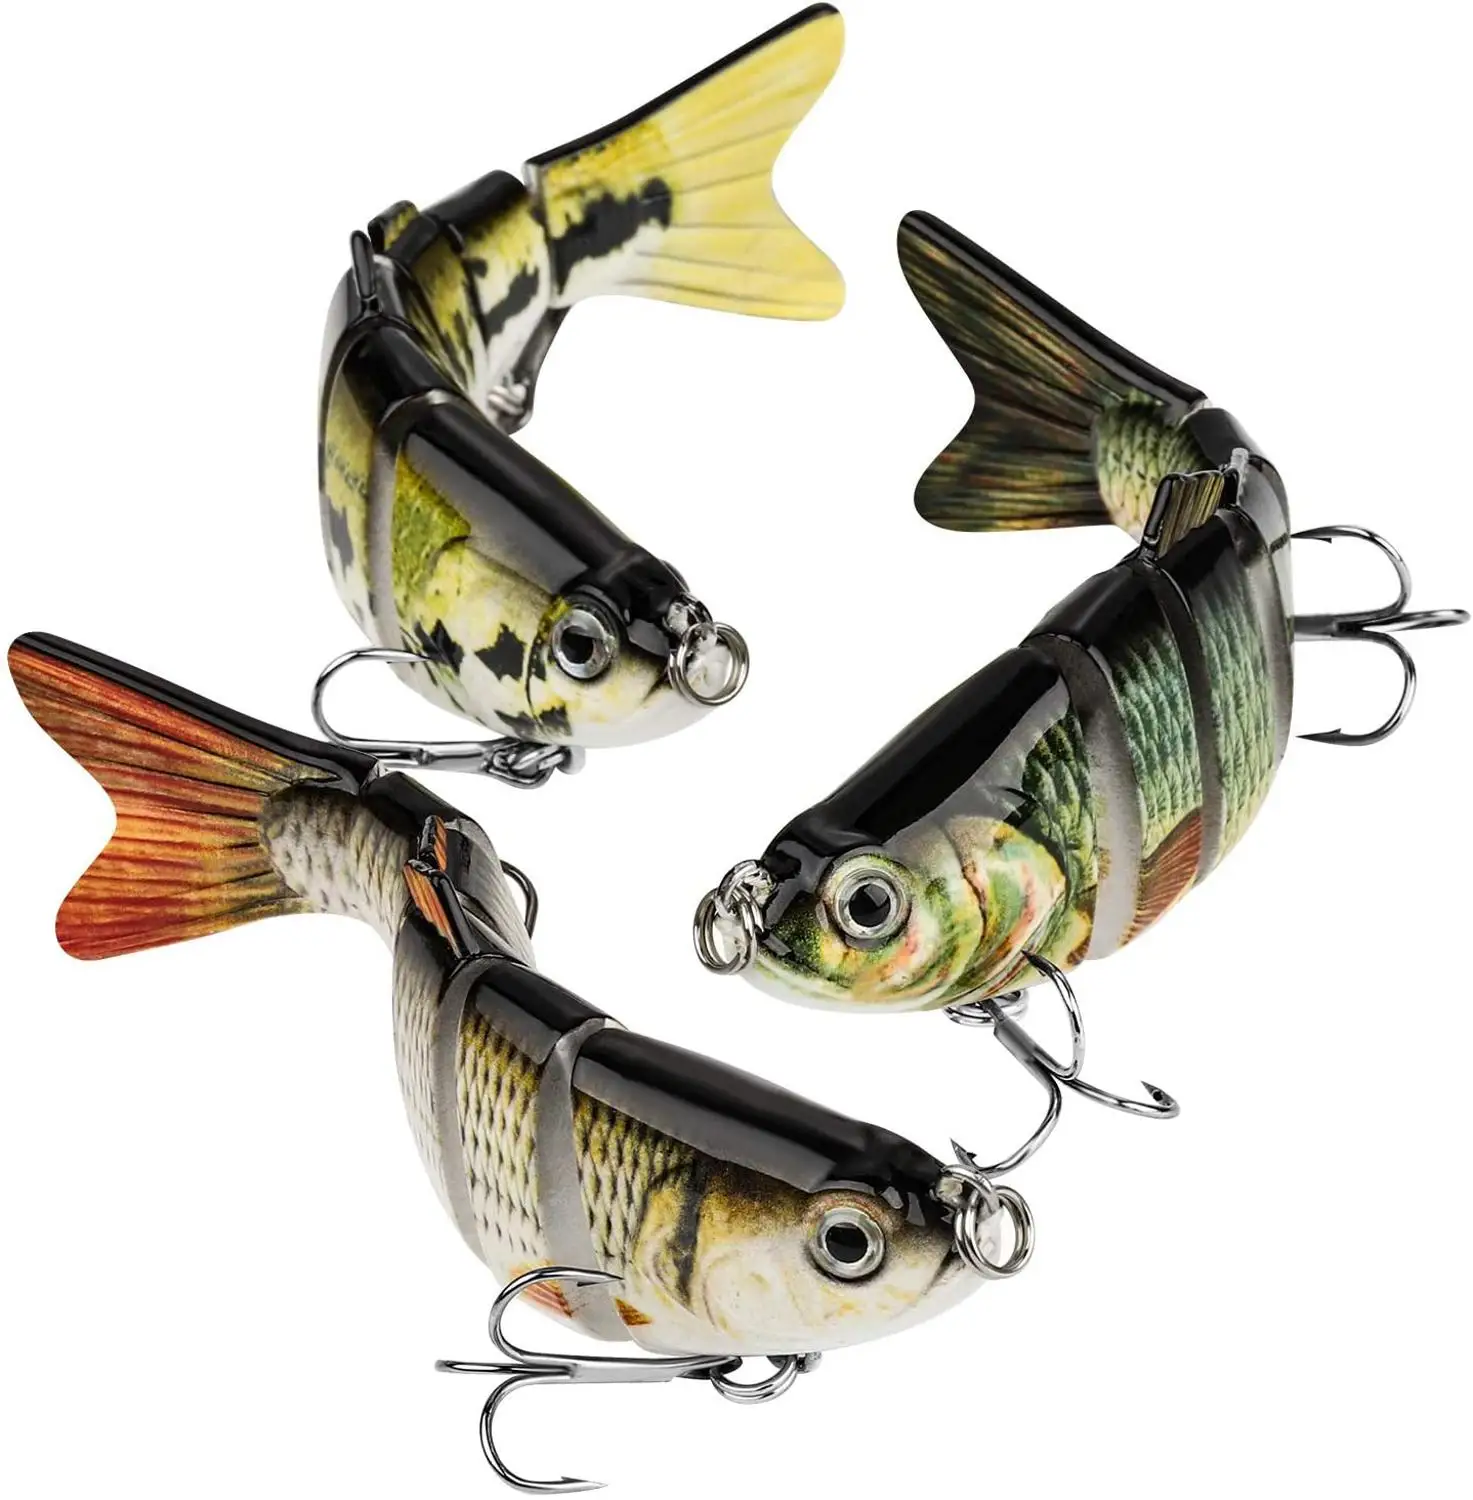 

Fishing Lures for Bass Trout 5-6" Segmented Multi Jointed Swimbaits Slow Sinking Bionic Swimming Bait Freshwater Saltwater